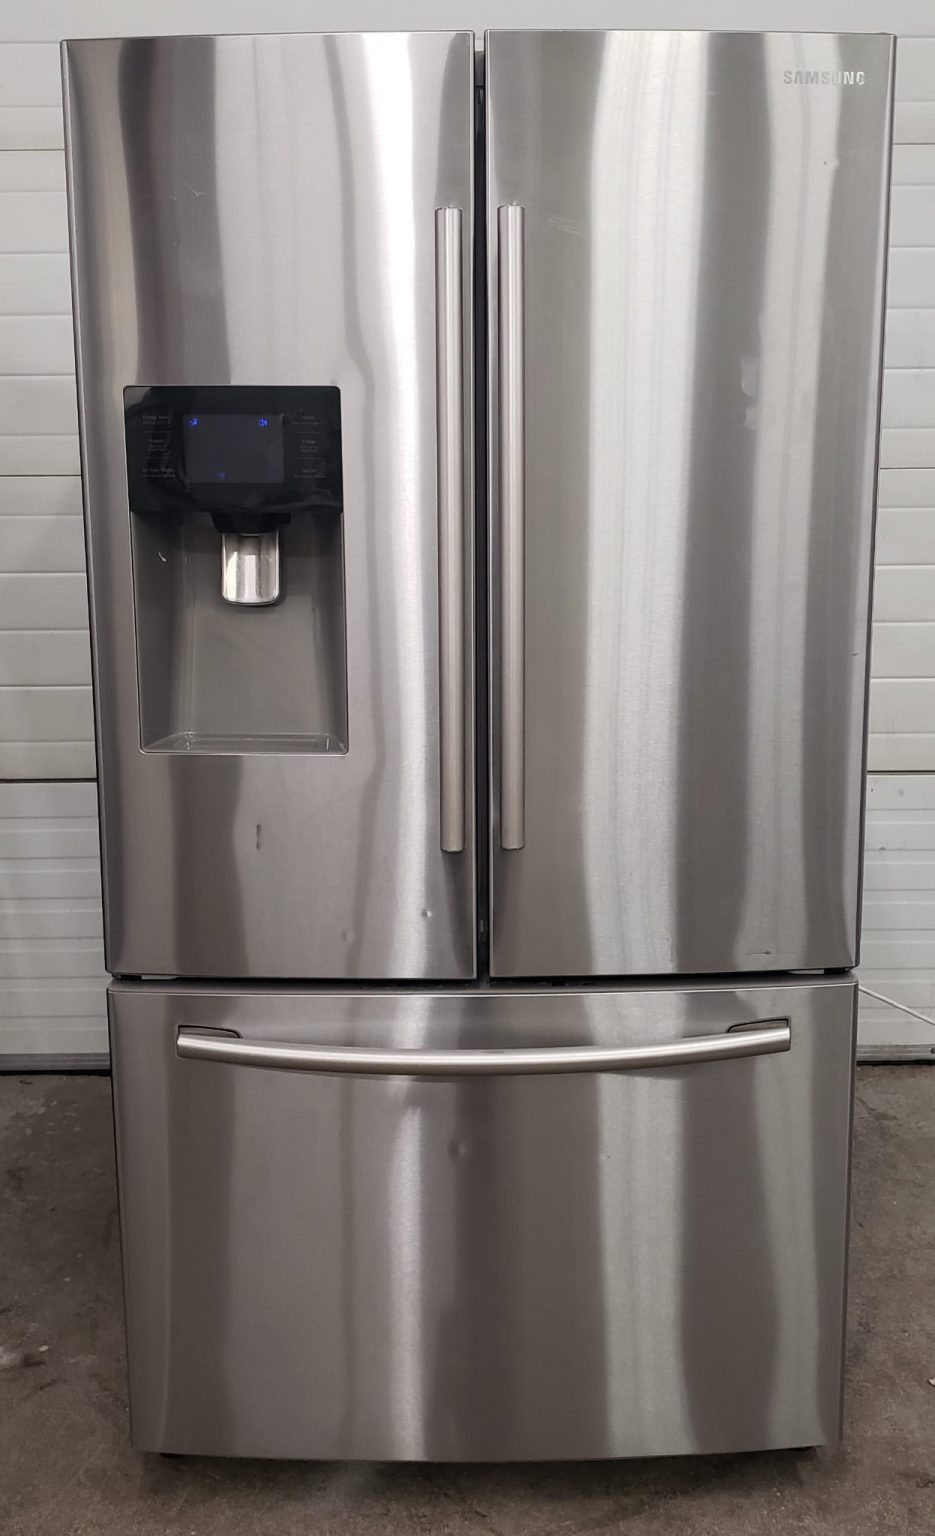 Order Your Used Refrigerator - Samsung Rf263beaesr/aa Today!